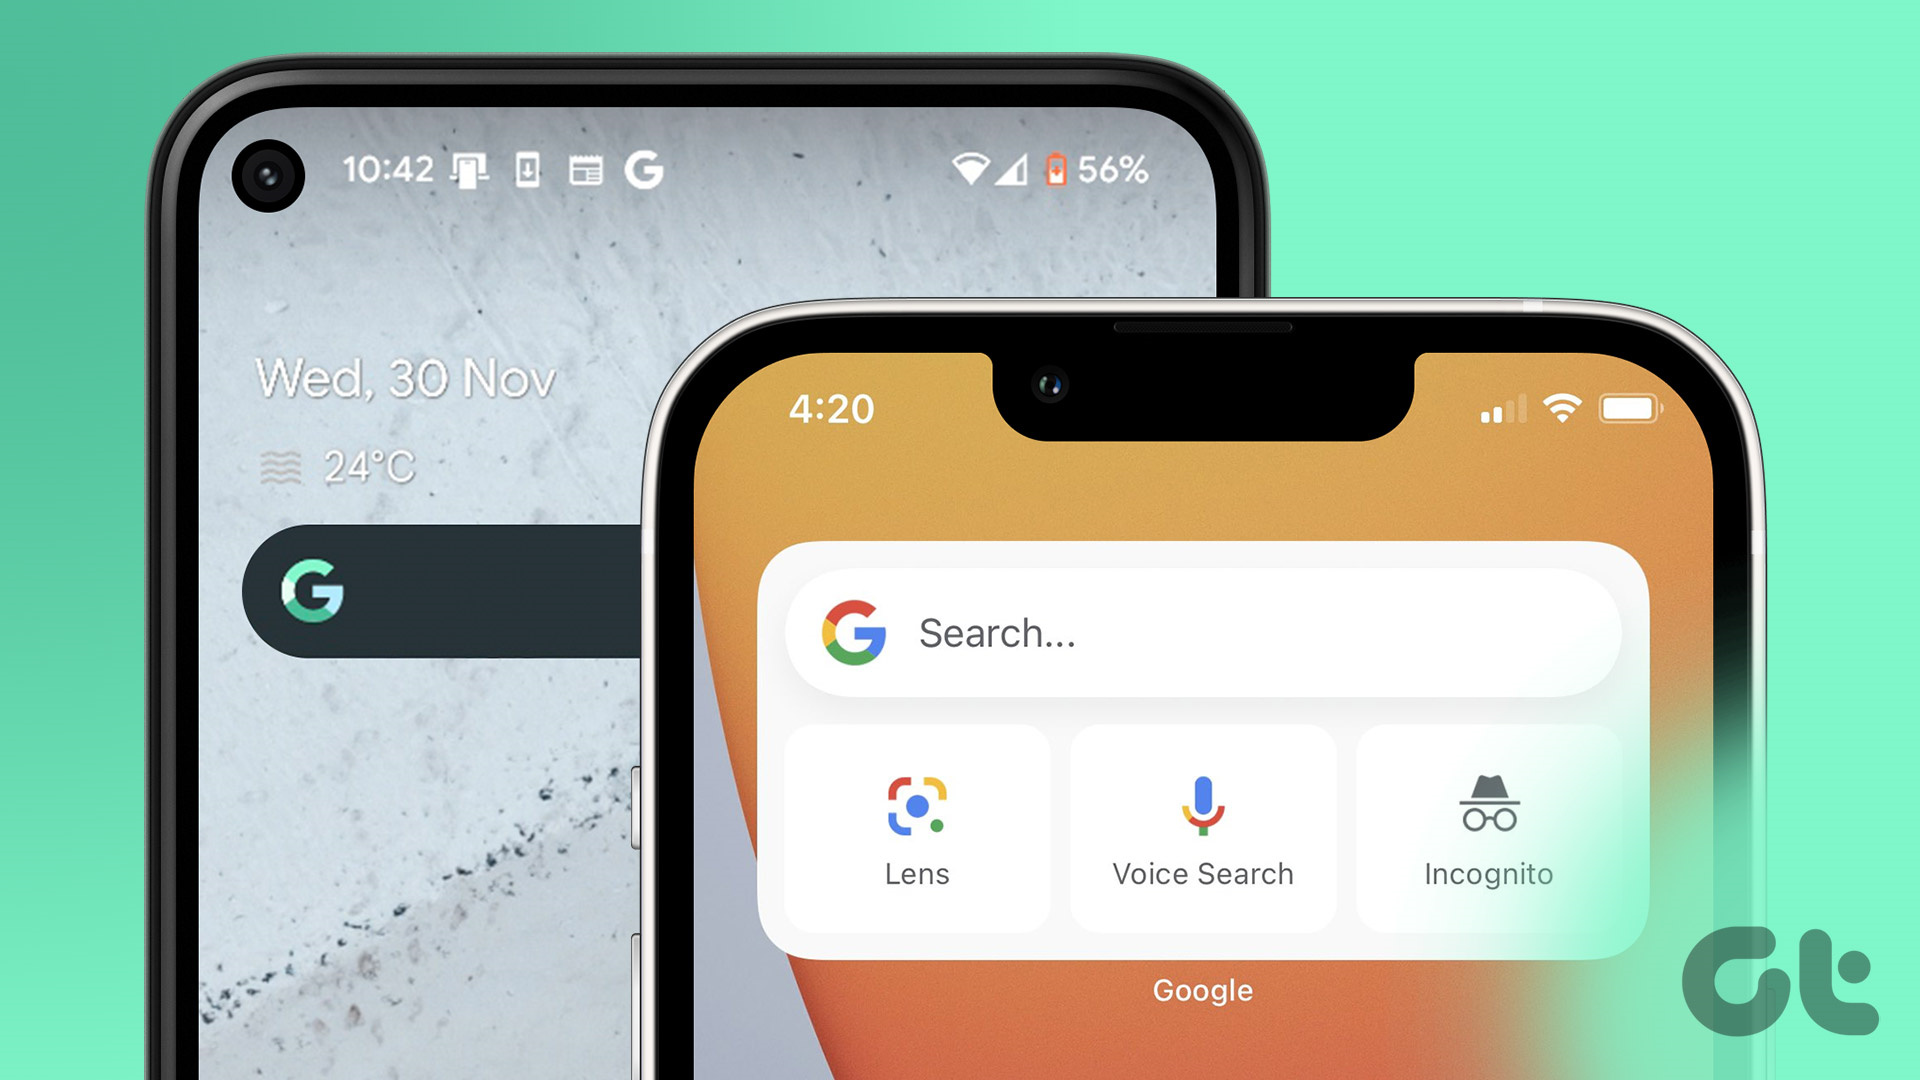 how to add google search bar to home screen on android and iphone